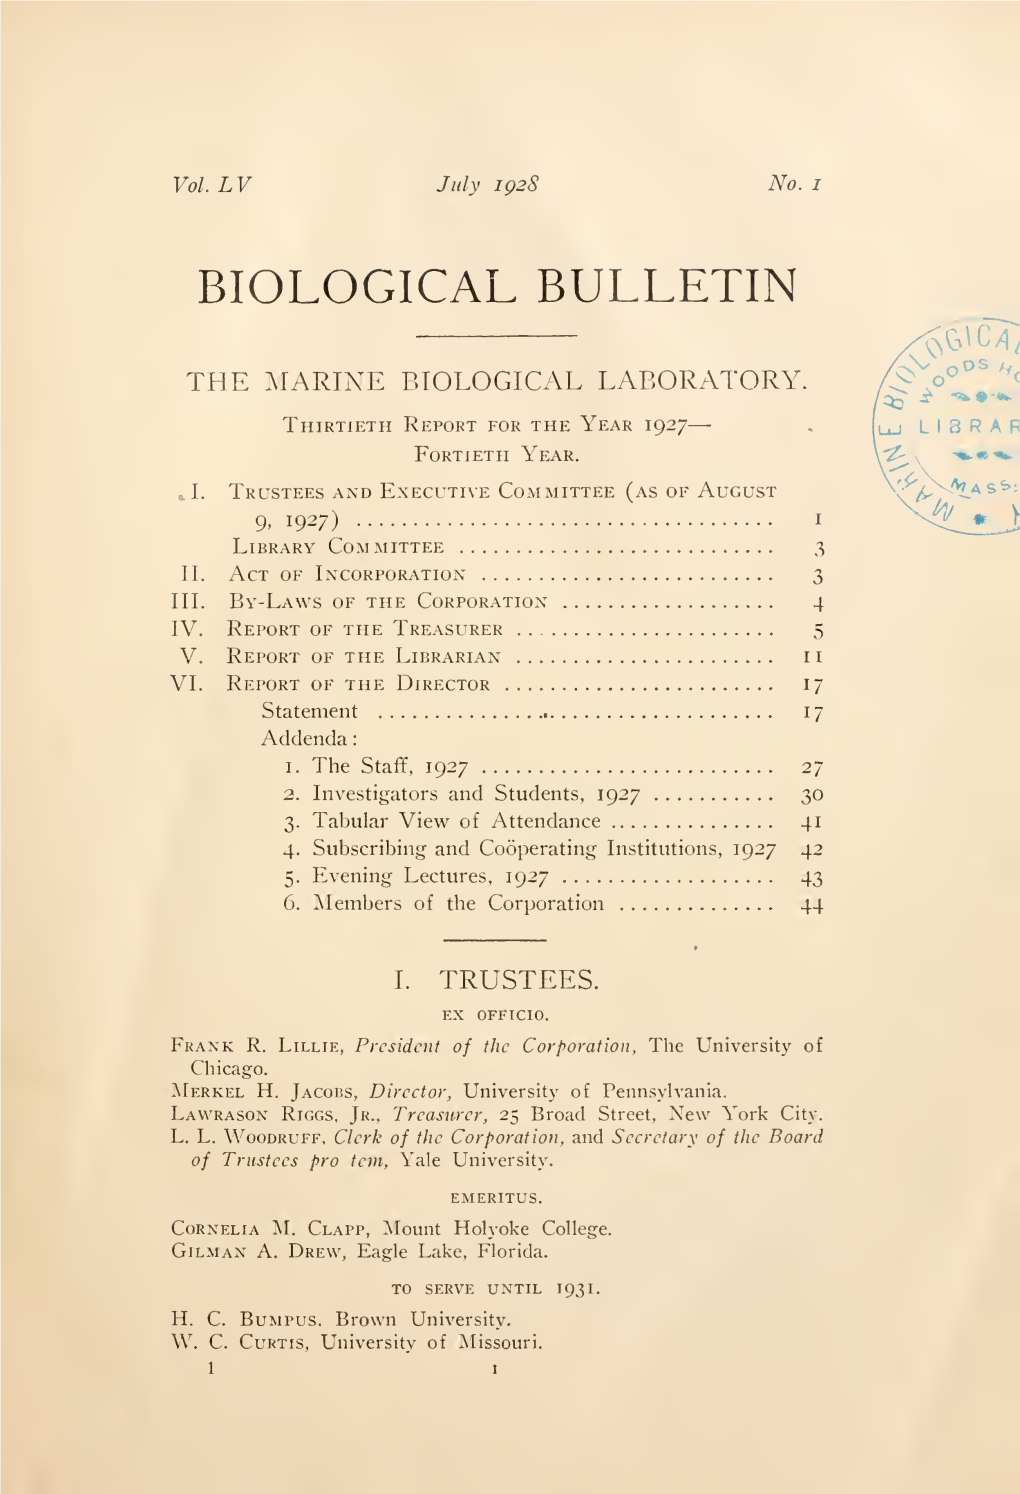 The BIOLOGICAL BULLETIN (67 Copies of the BIOLOGICAL BULLE- TIN Sent and While New Sub- Being Out) ; 19 by Gift, Only 30 Paid Scriptions Have Been Added